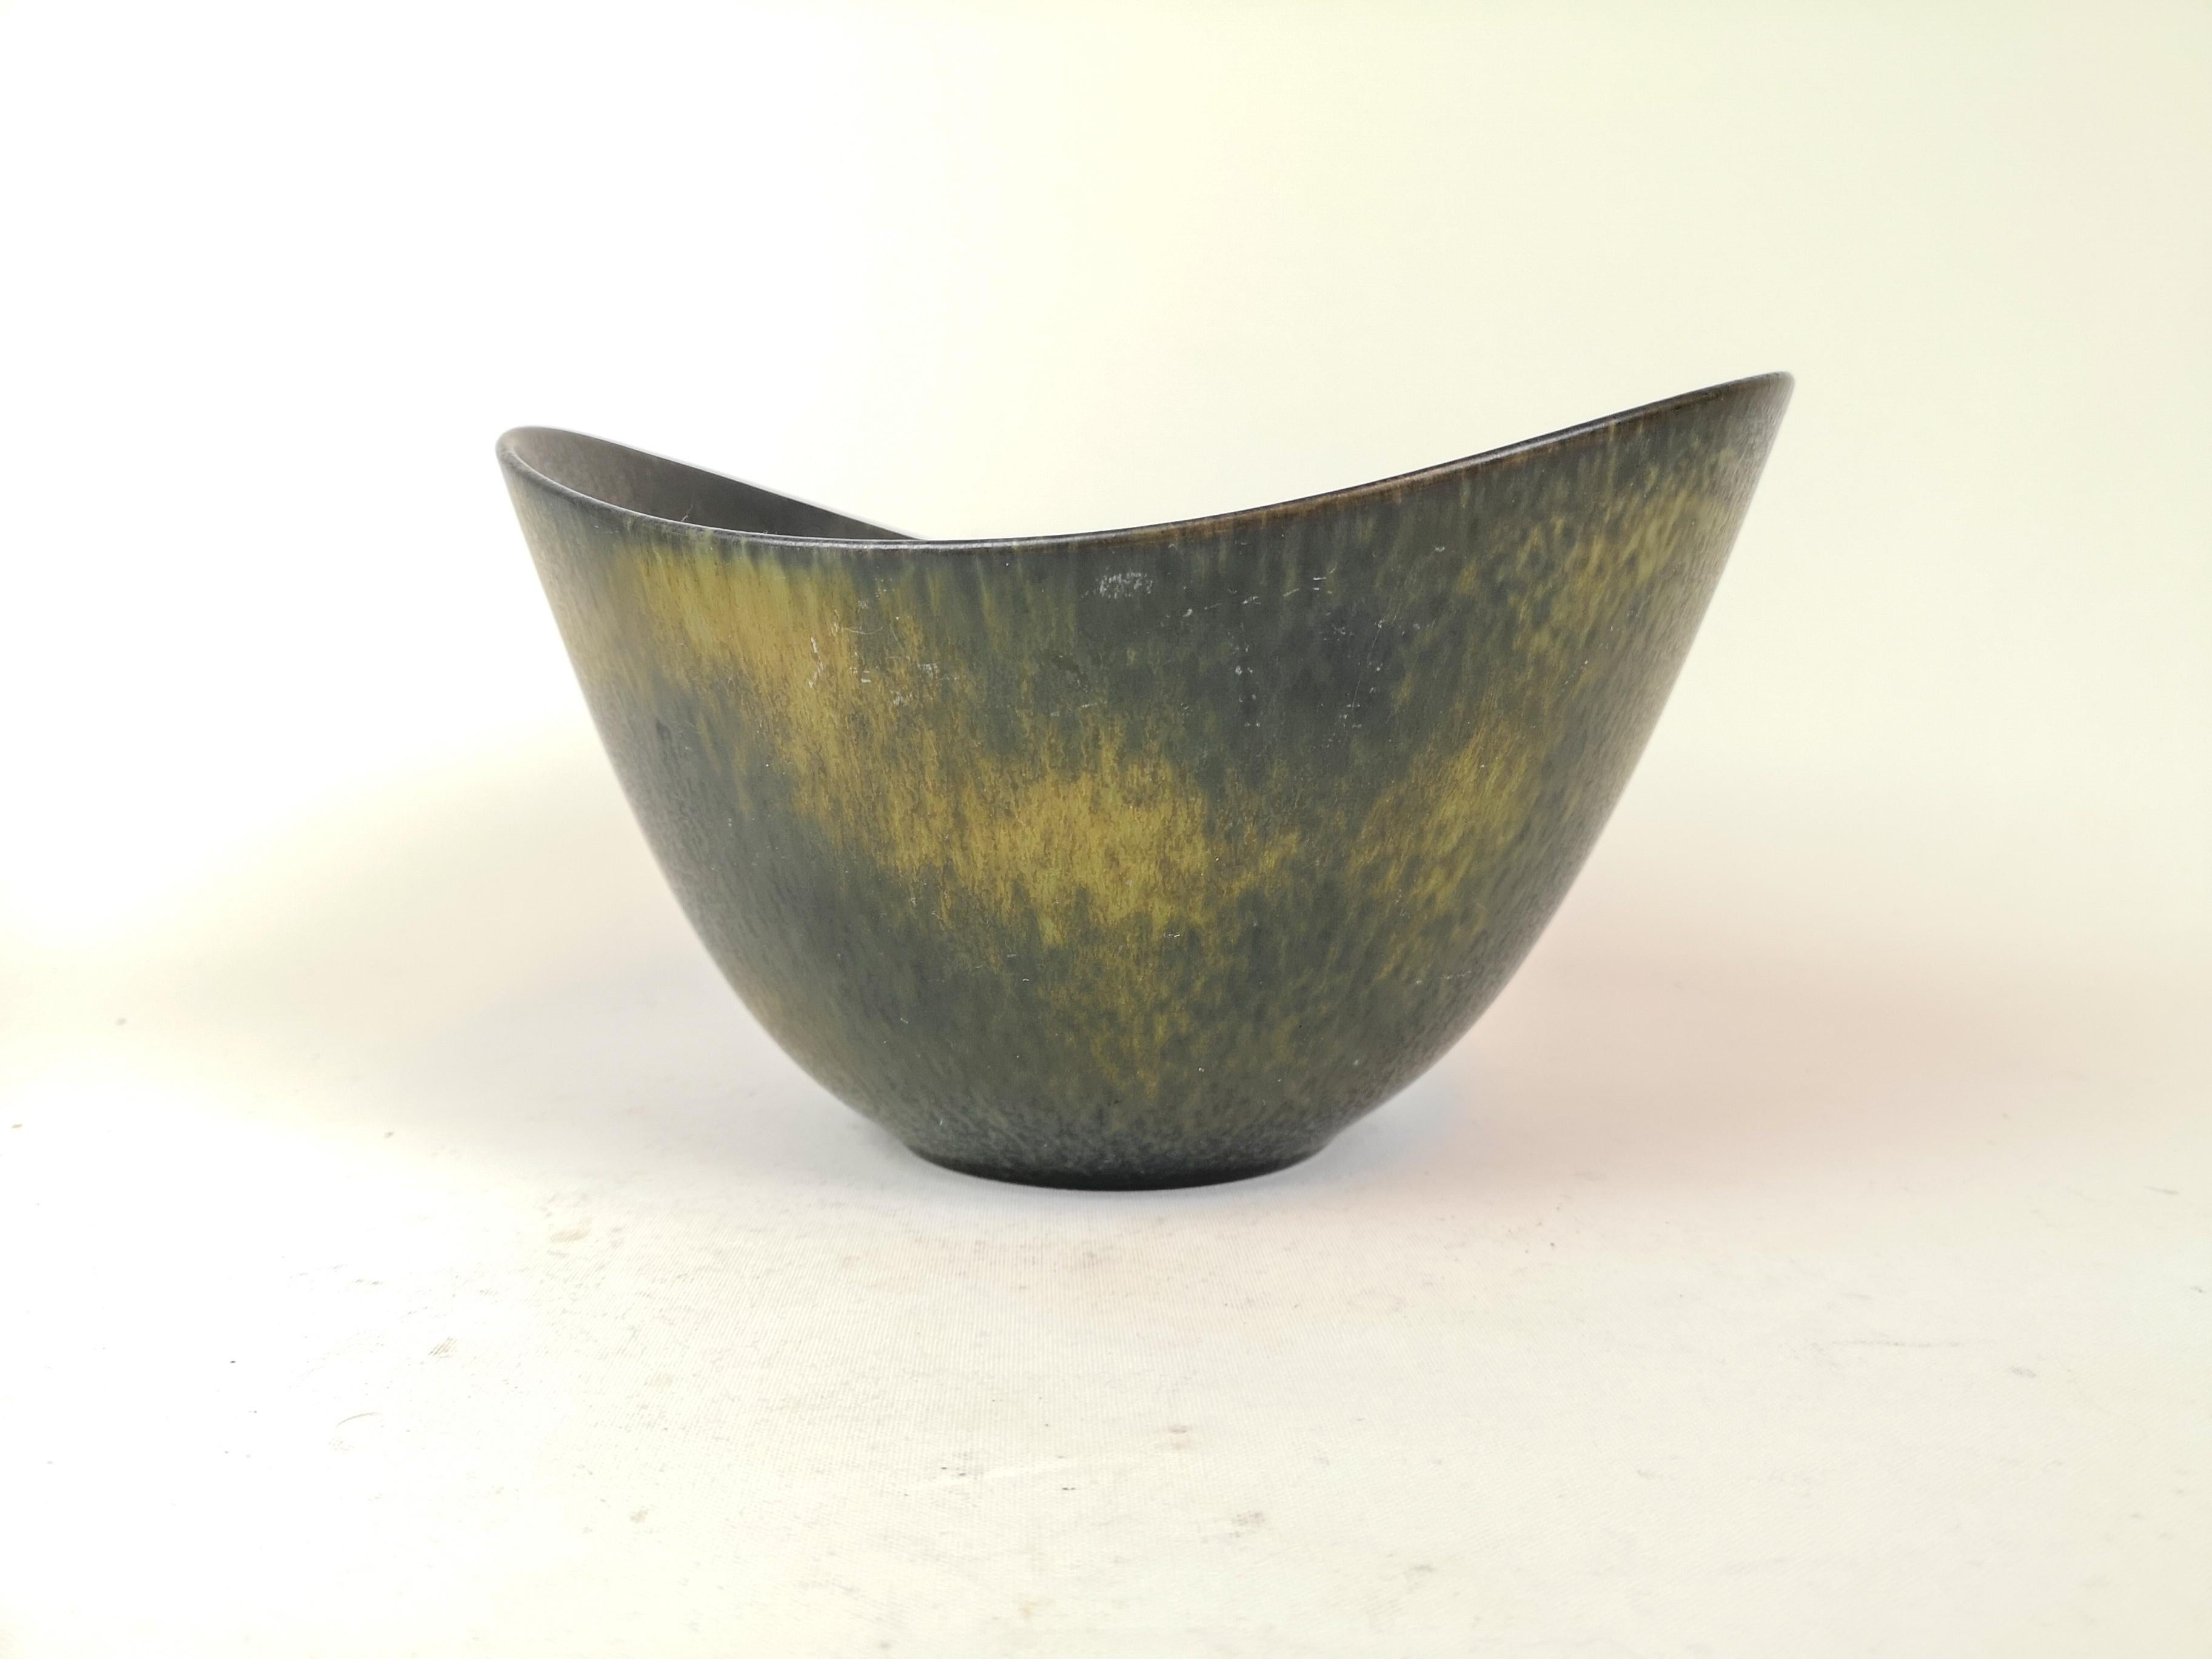 Wonderful largest model of the AXK bowl manufactured in the 1950s at Rörstrand, designed by Gunnar Nylund.
The bowl has a wonderful glaze and it lifts the shape of the bowl to a wonderful object.

Good condition

Measures: H 16 cm x W 27 cm x D